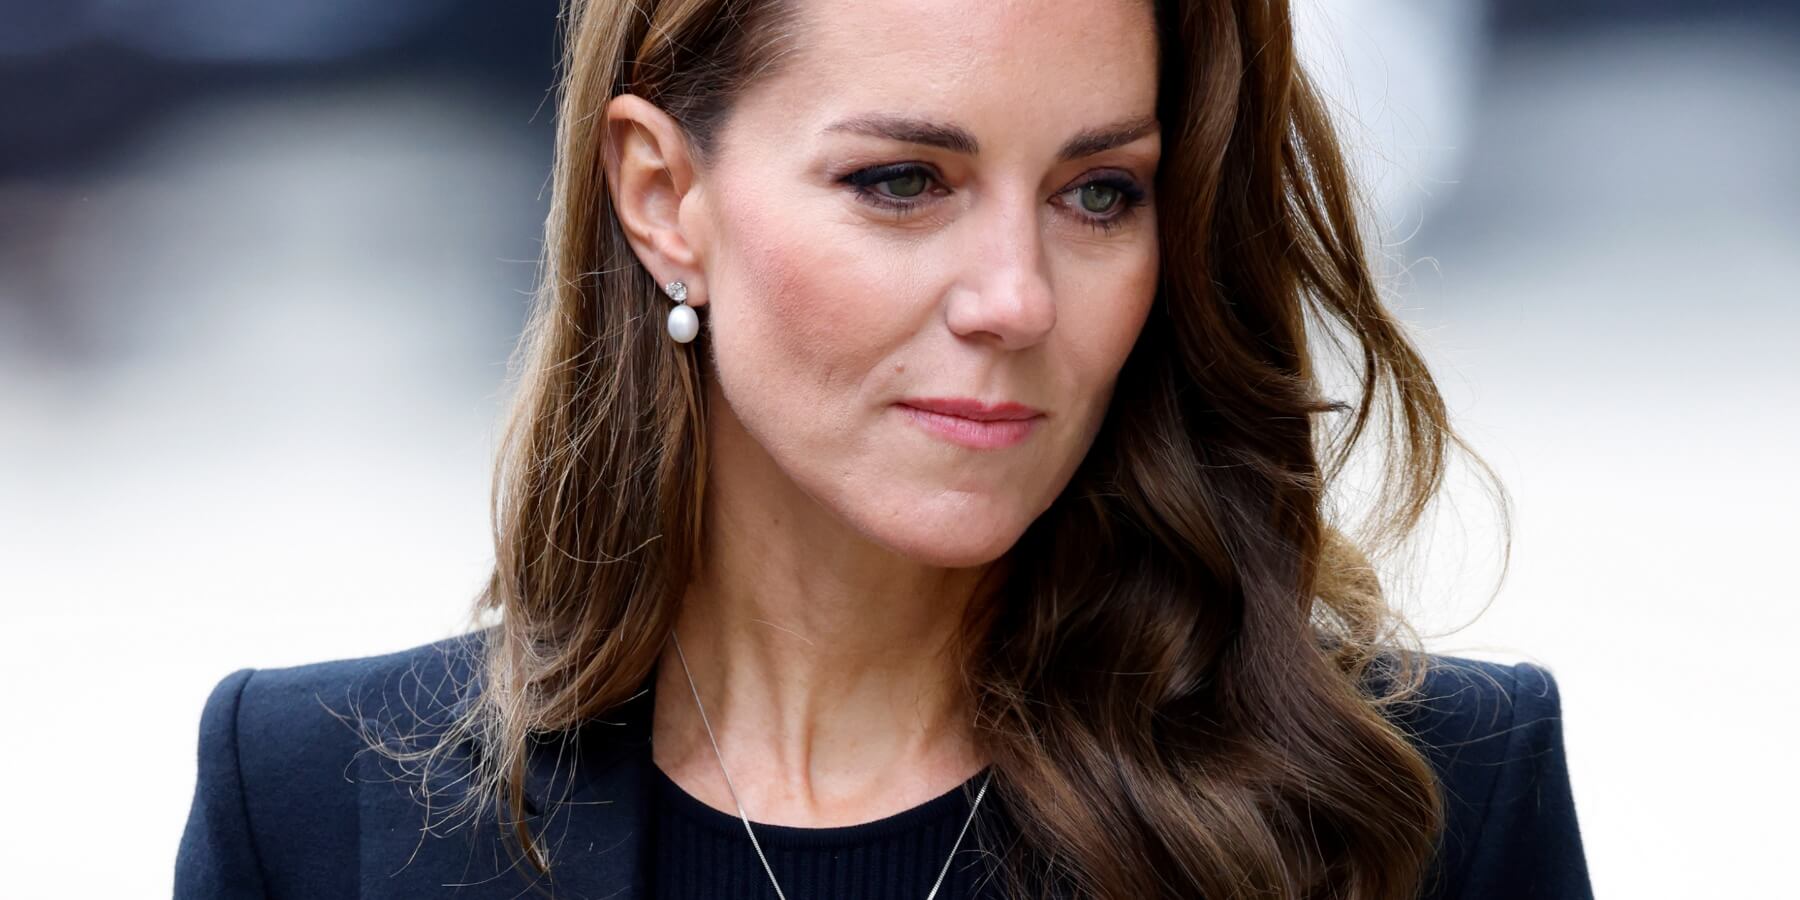 Kate Middleton’s Drew on Strength and Courage to Film Heartbreaking Cancer Video: Expert